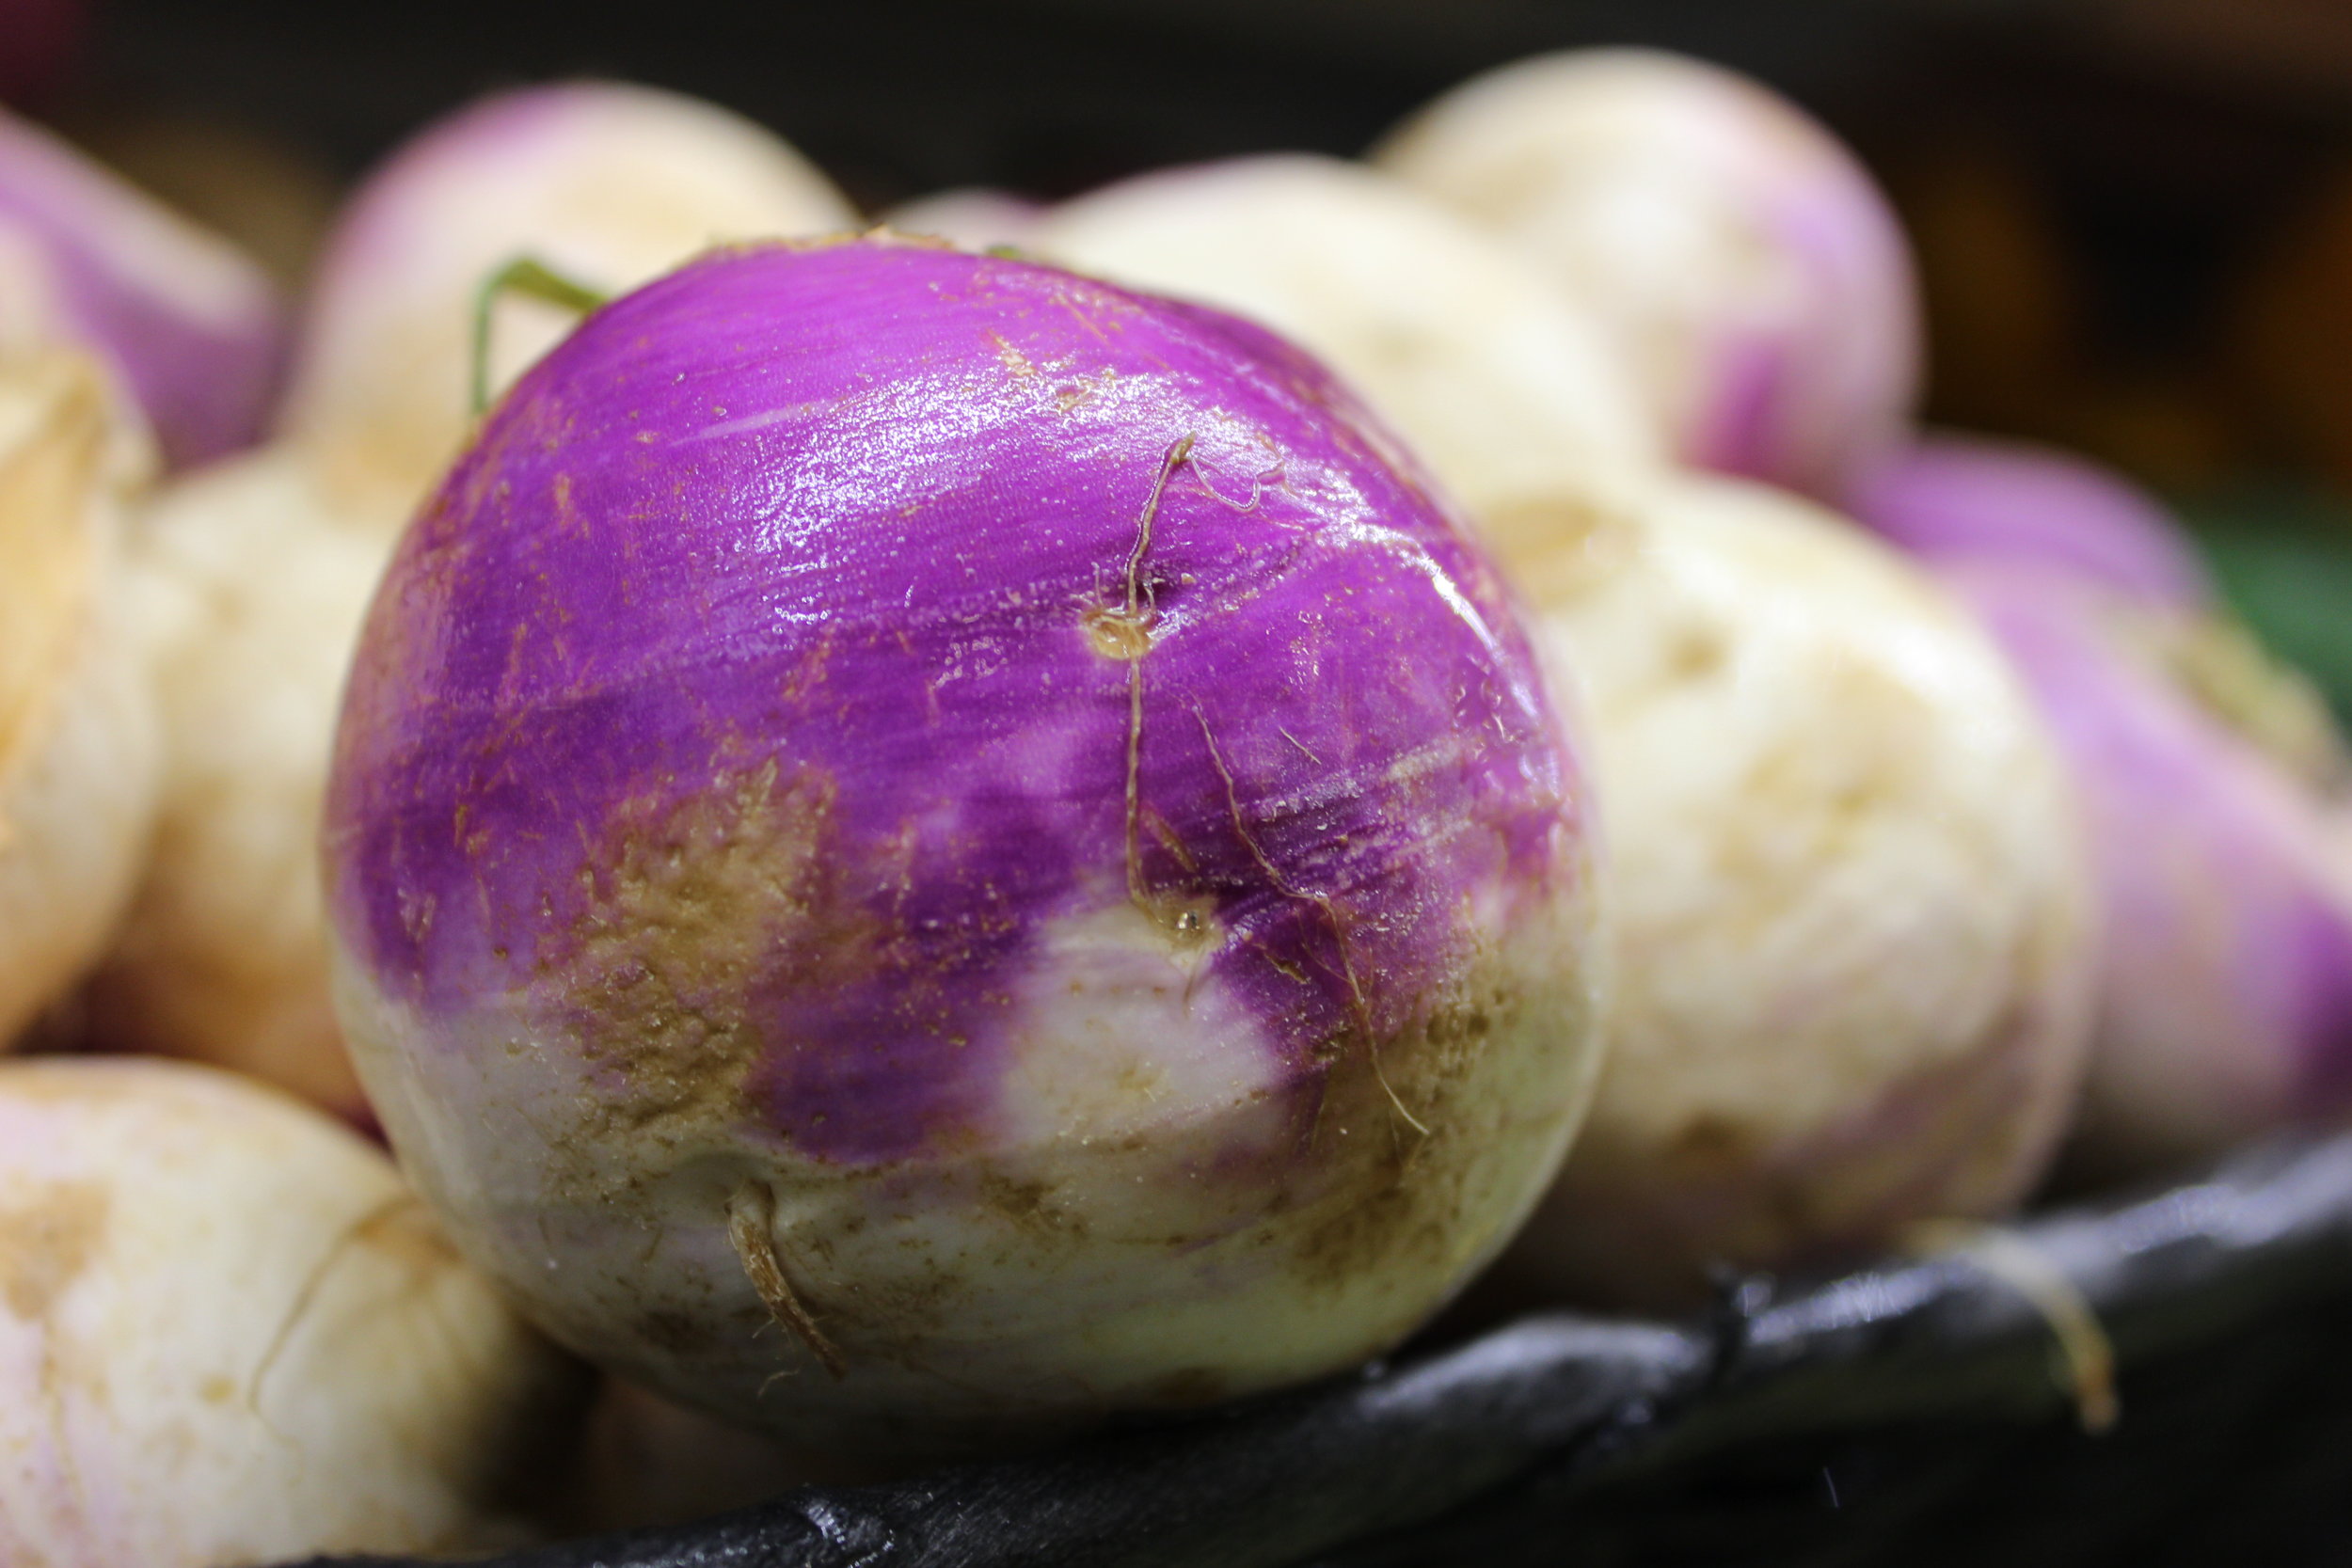 Alt text: a purple and white root vegetable perches on the edge of a long shelf full of them.